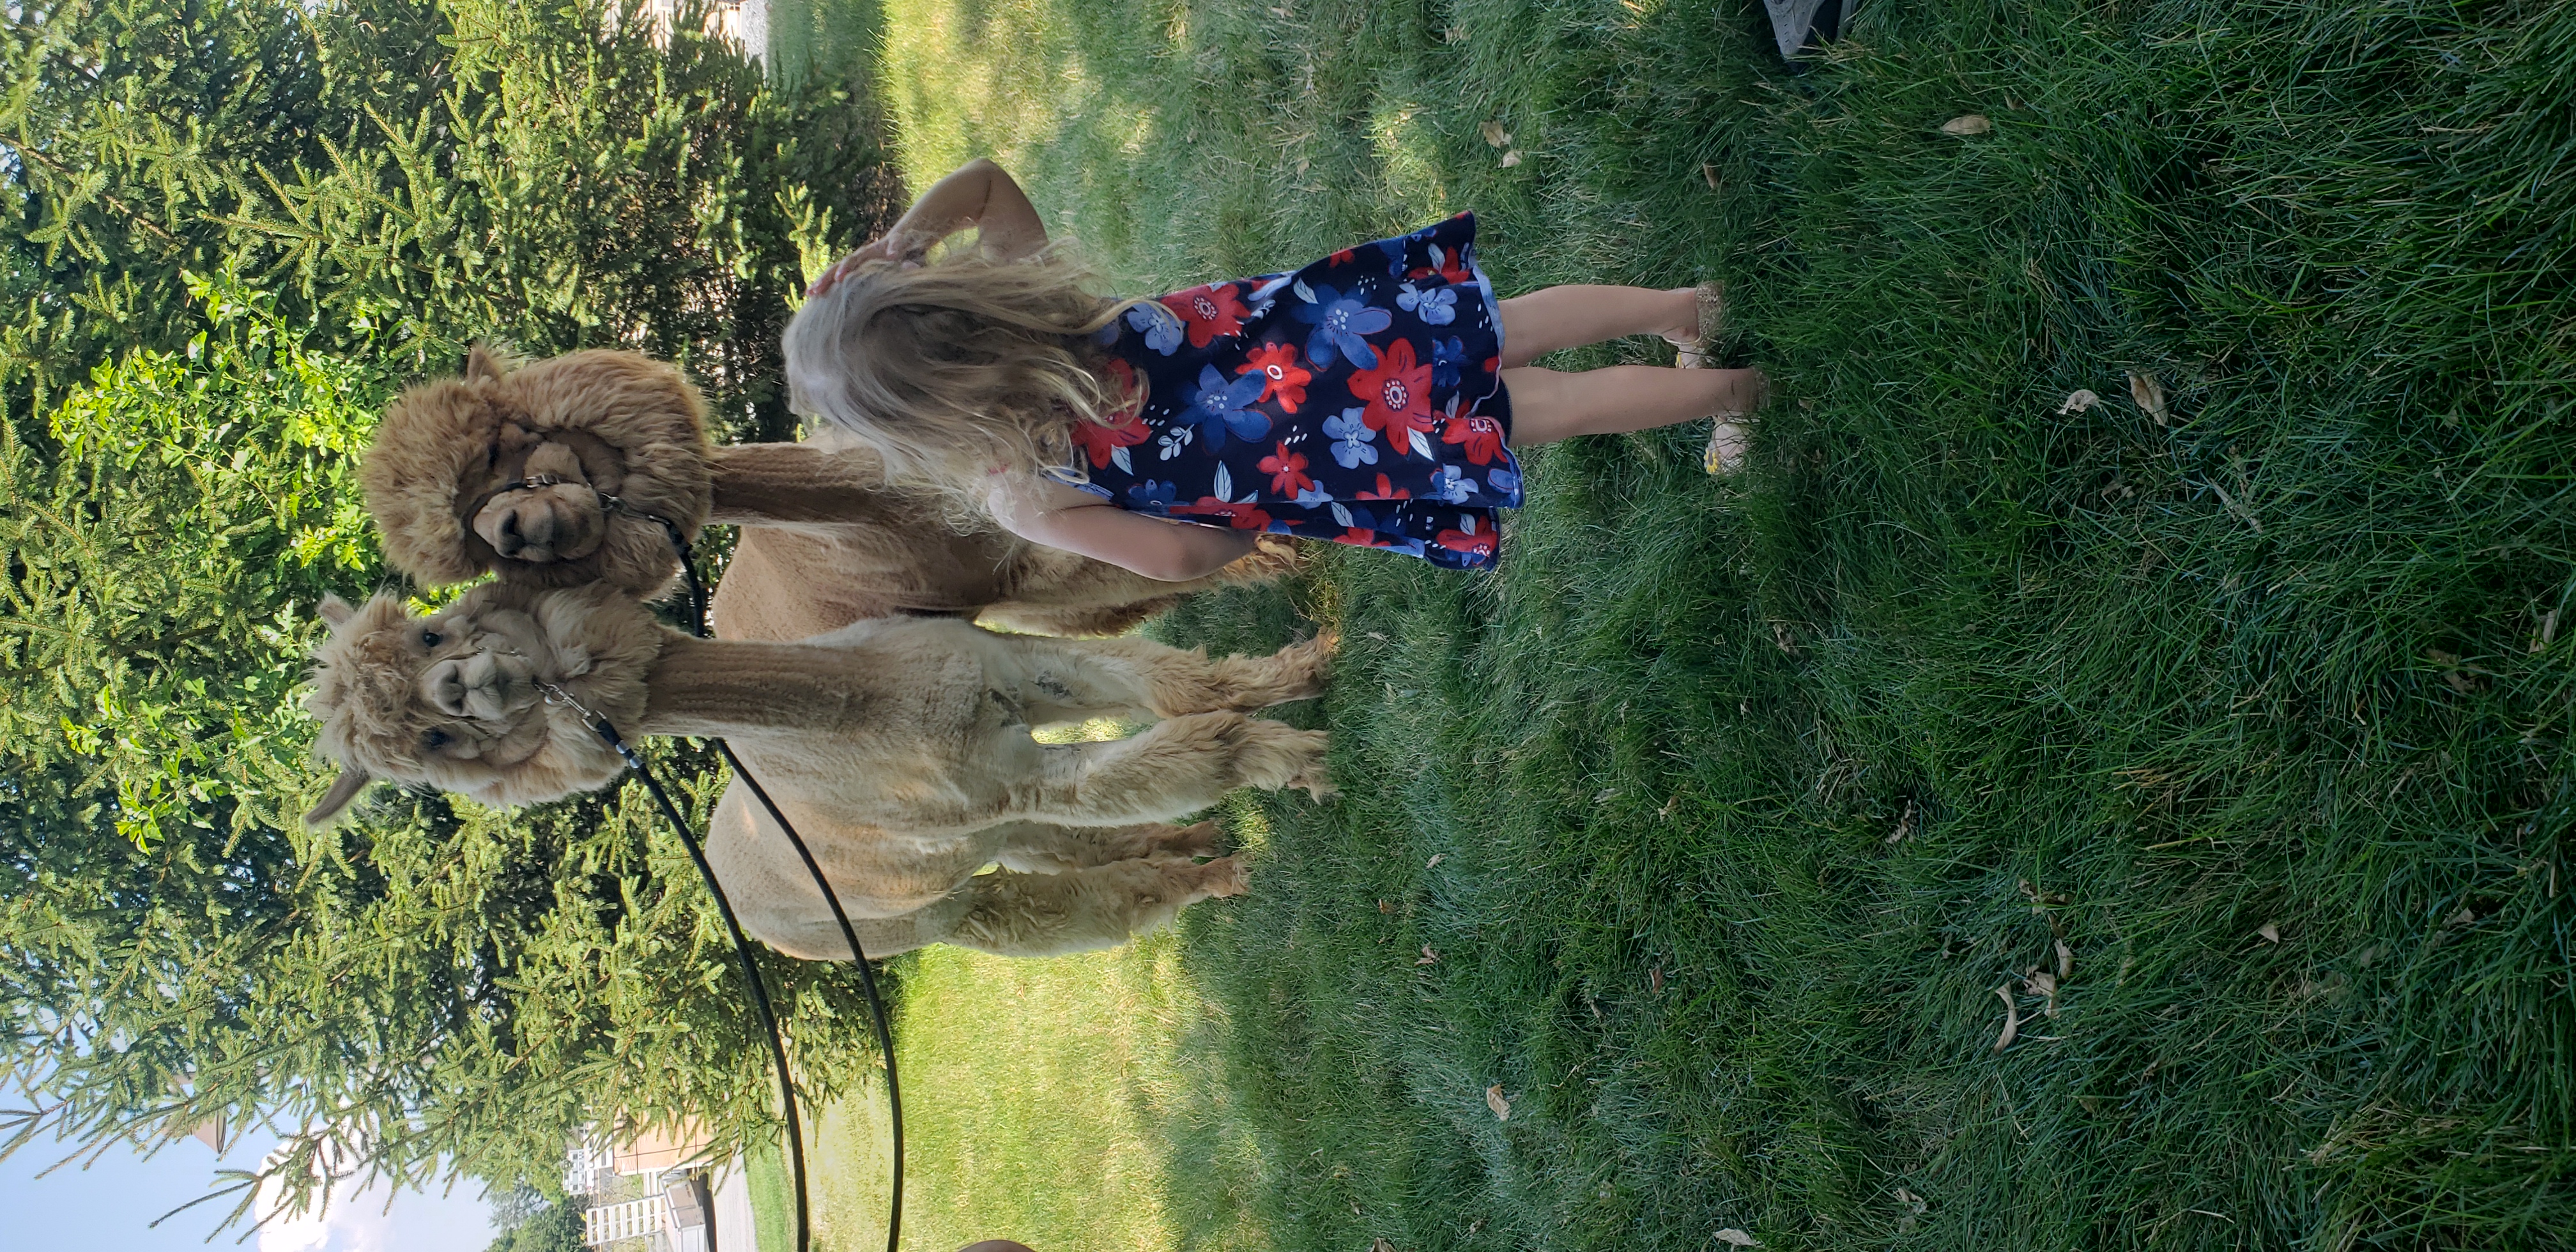 Little girl with blonde hair looking at 2 alpacas